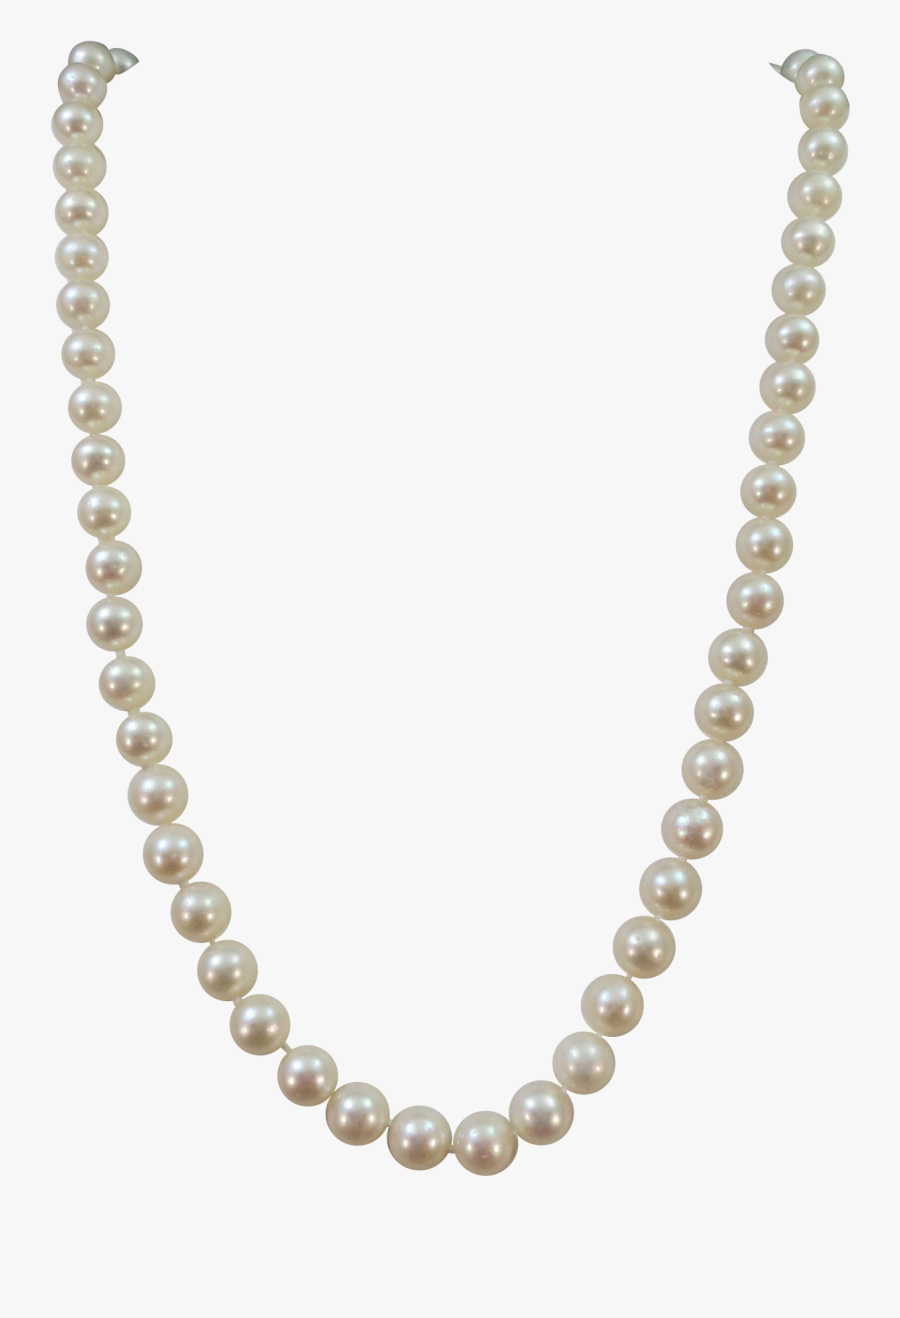 Pearl Necklace Png Png.